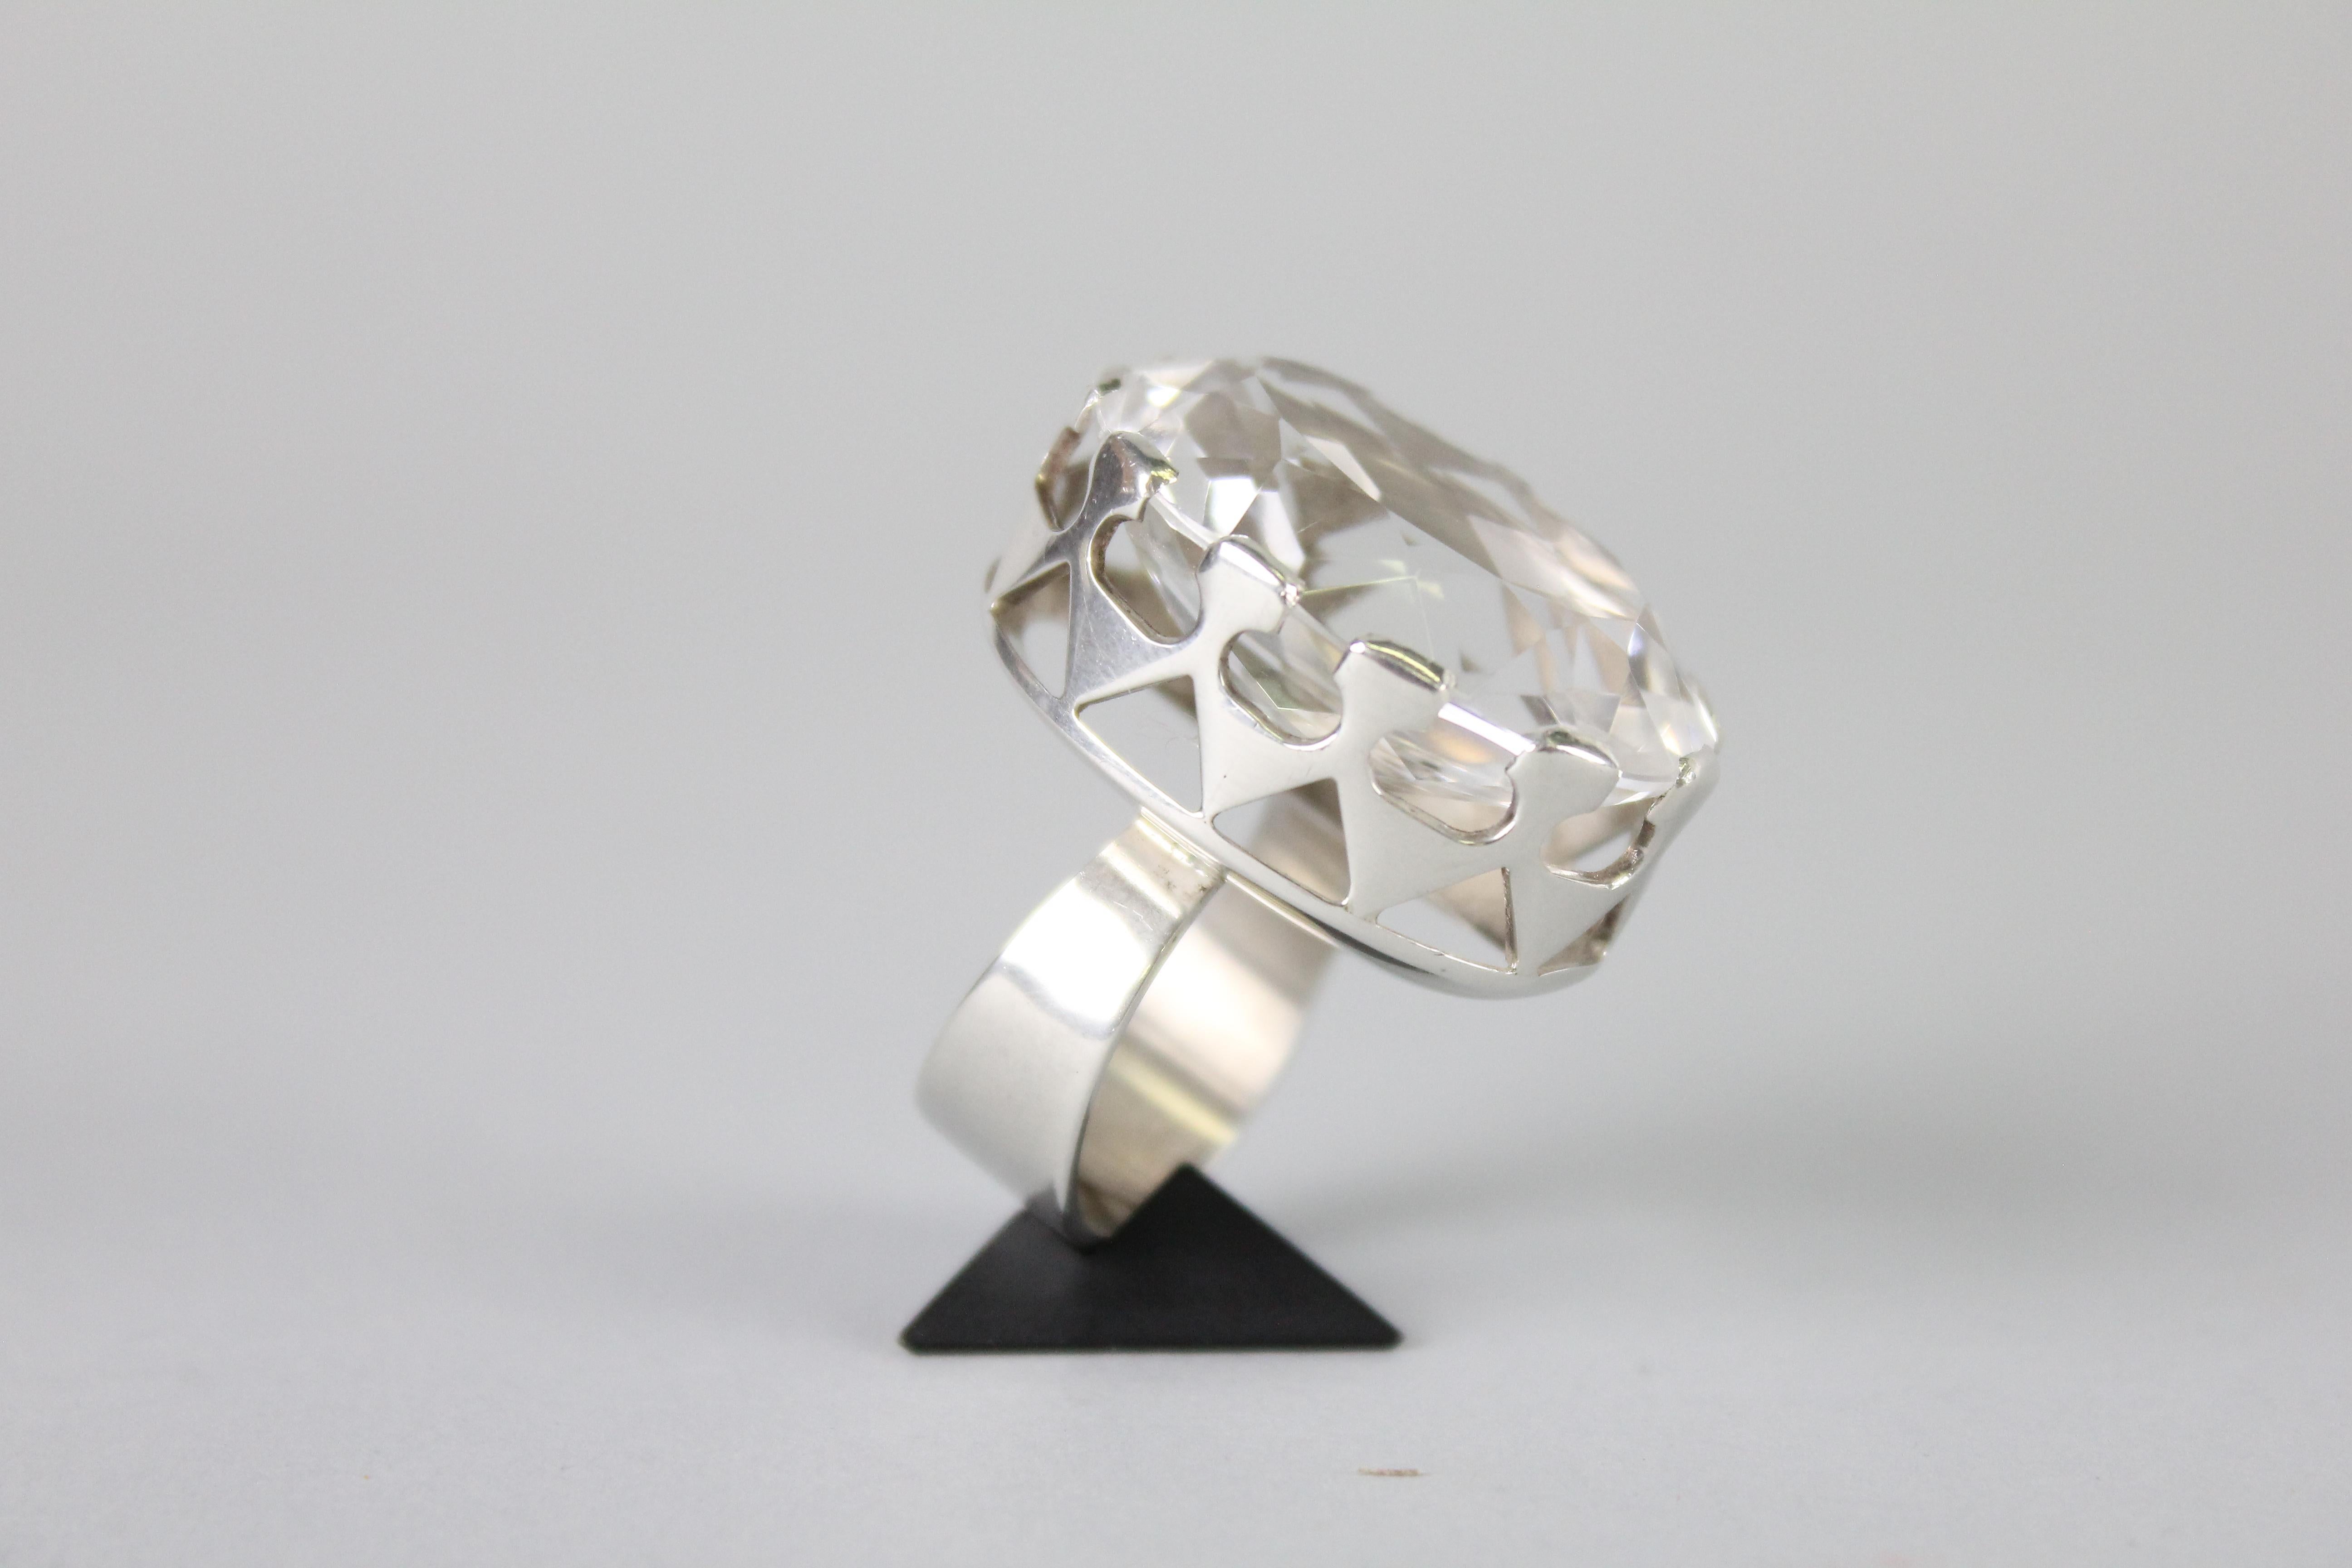 Modernist Ring in Silver and a Large Rock Crystal by Kaplan, Stockholm, 1968 For Sale 3